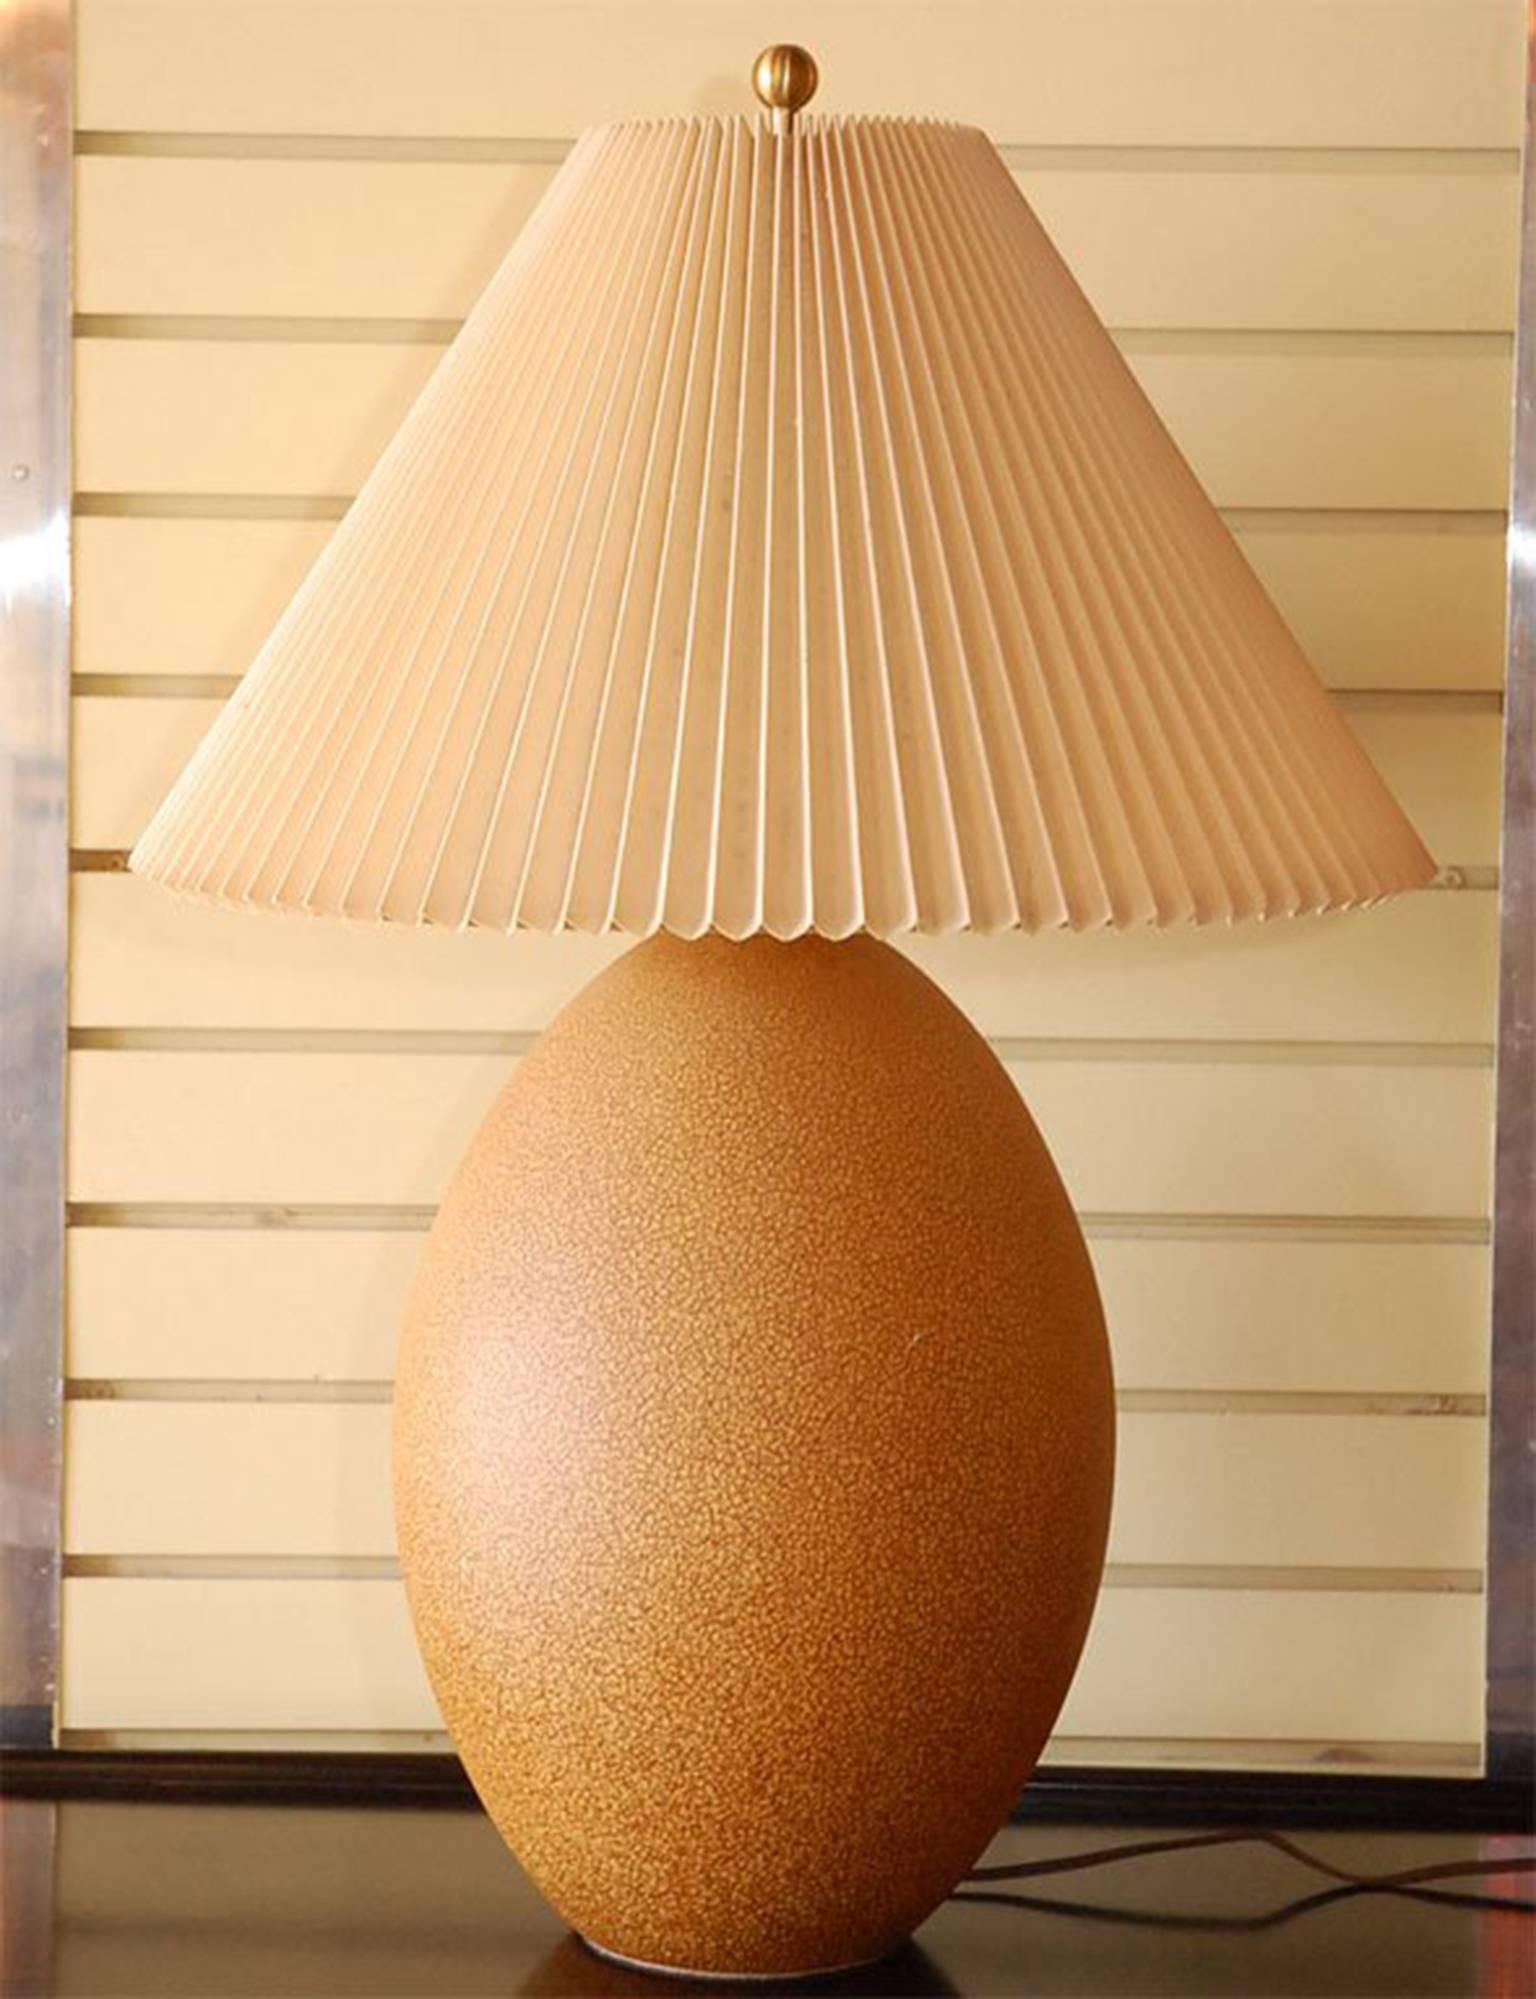 Pair of egg ceramic lamps with their original shades.

Beautiful color and light!